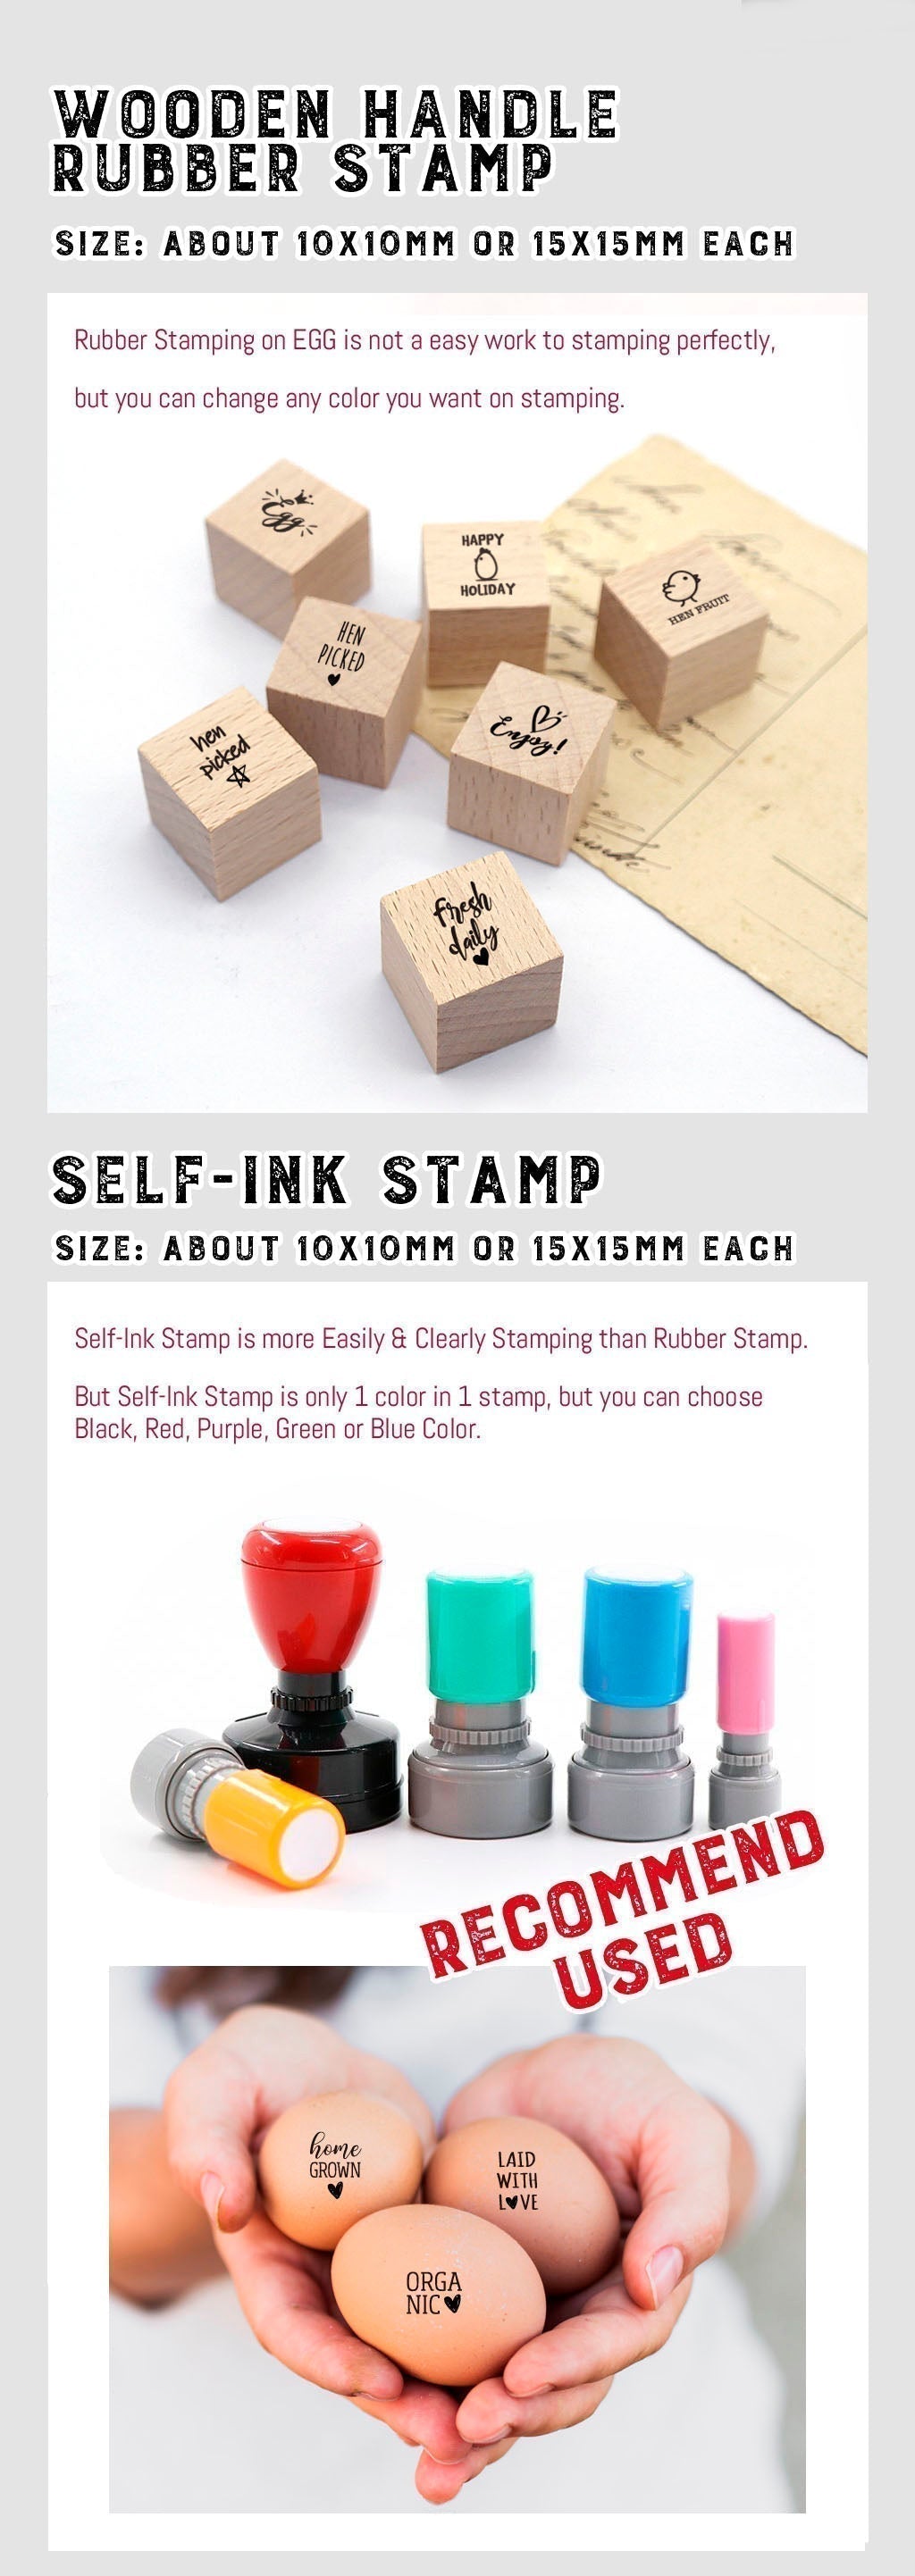 A sample to tell what's Self Inking Stamp and Rubber Stamp.